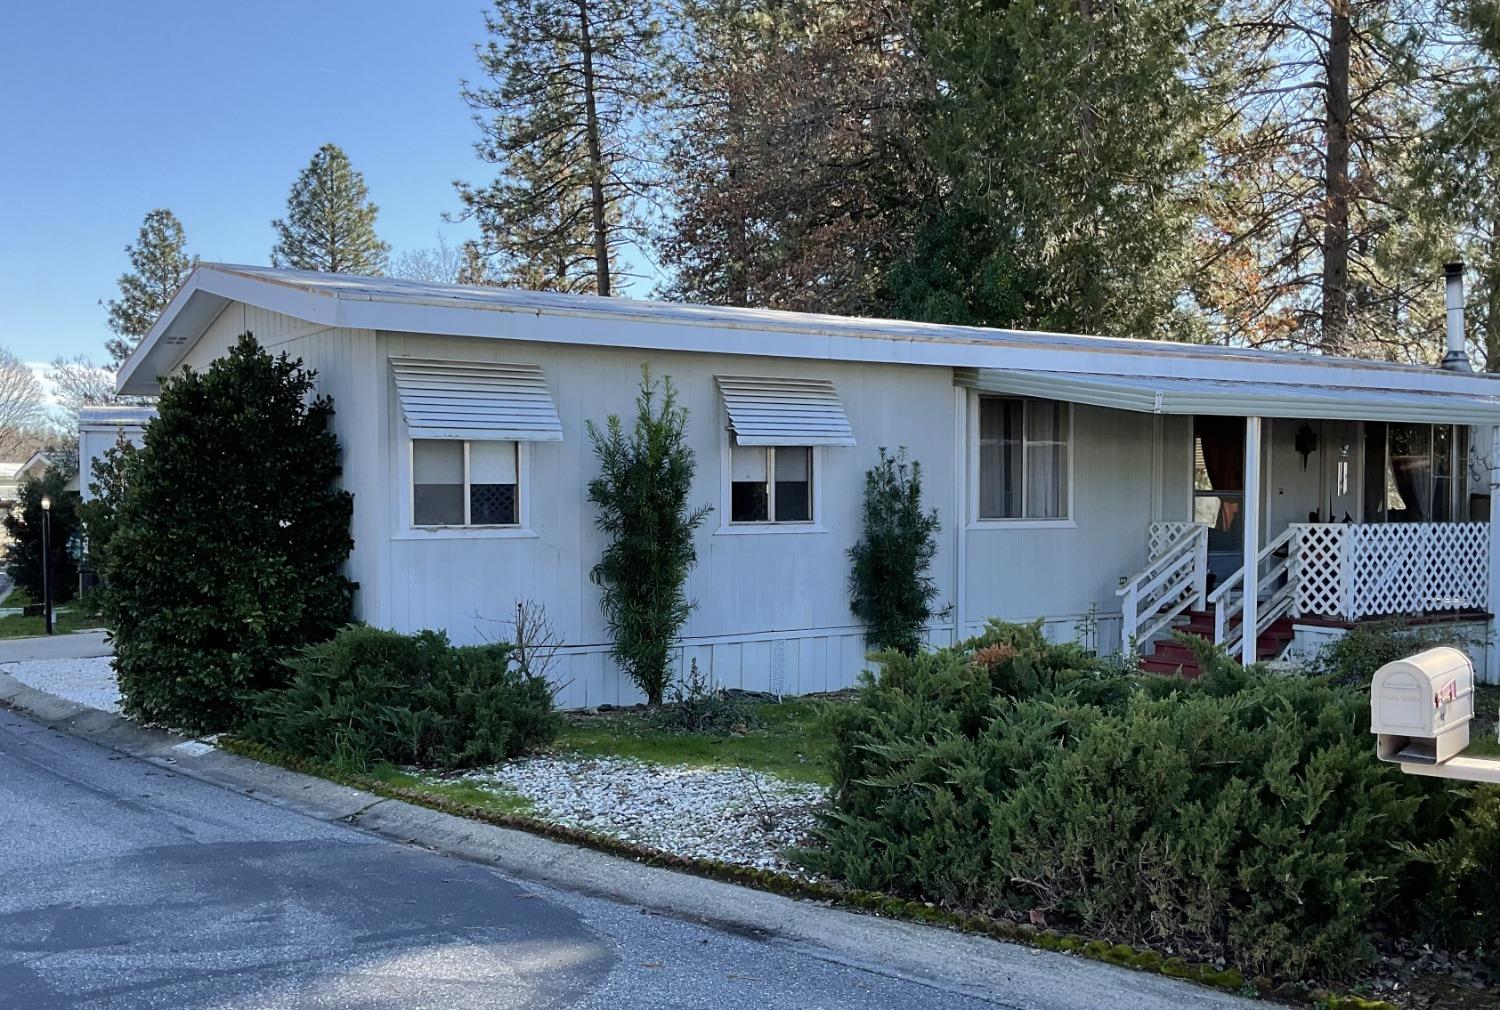 Photo of 10235 Forest Springs Dr in Grass Valley, CA